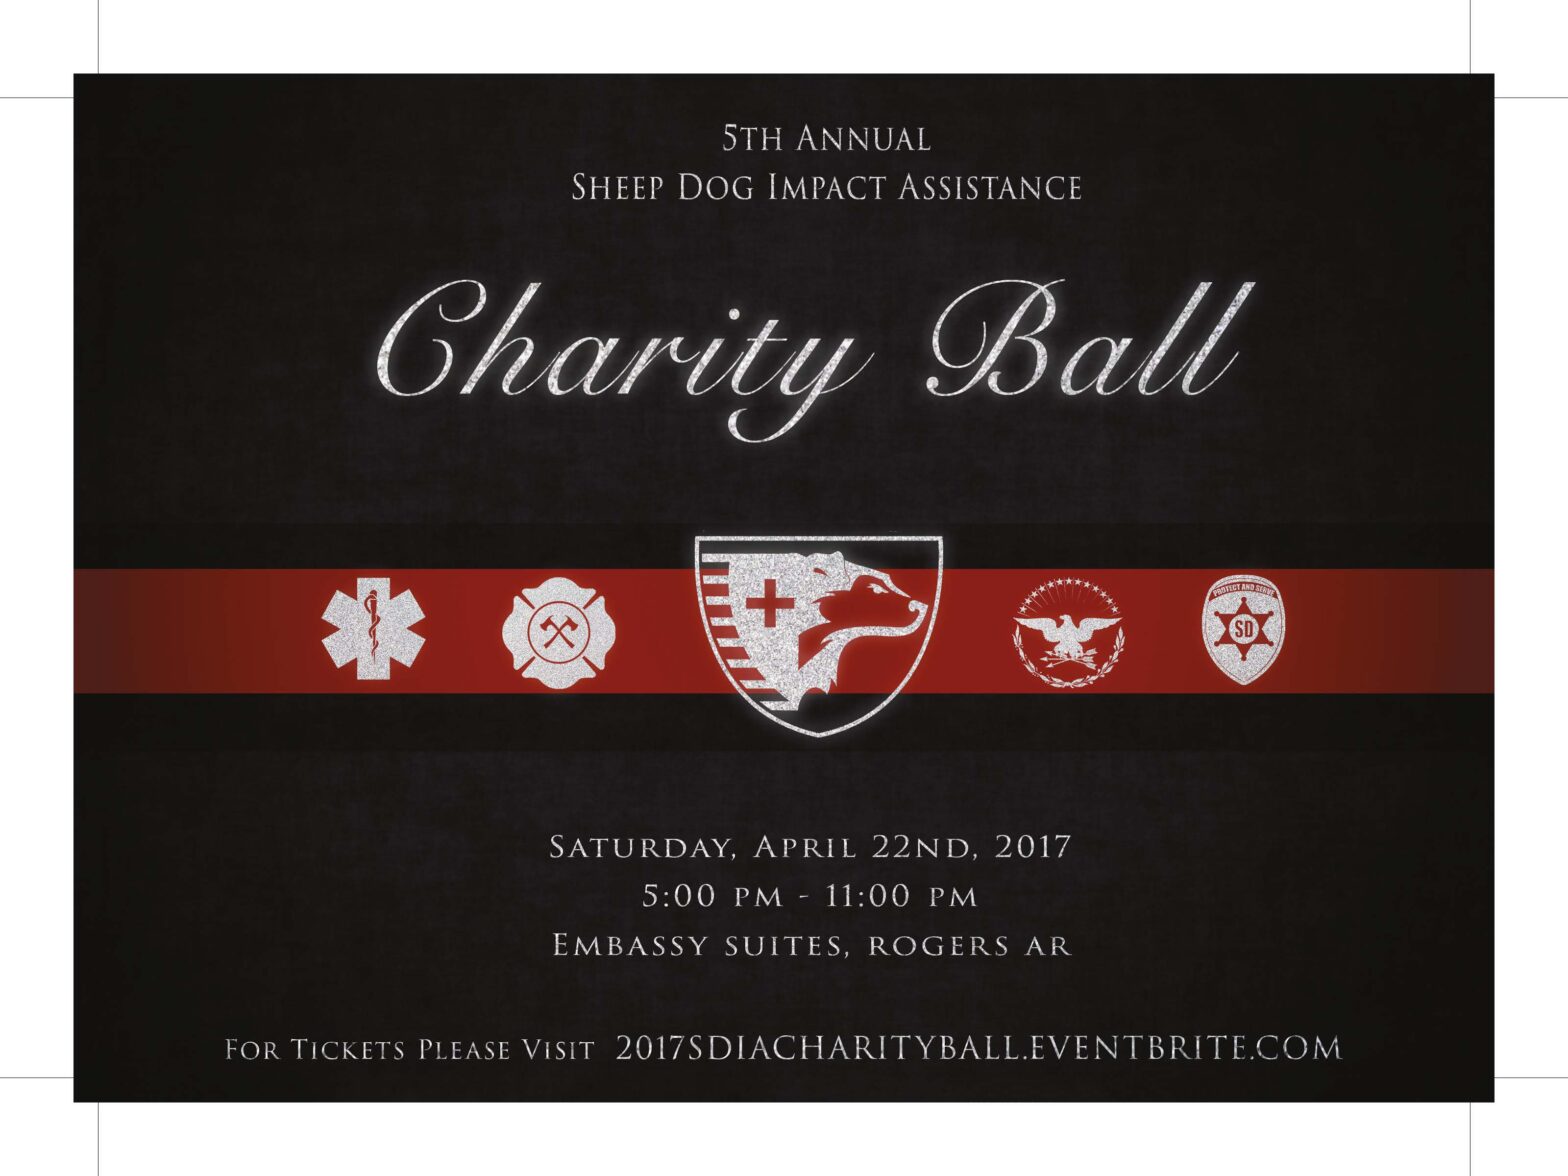 SDIA’s 5th Annual Charity Ball is on Sat., April 22, 2017